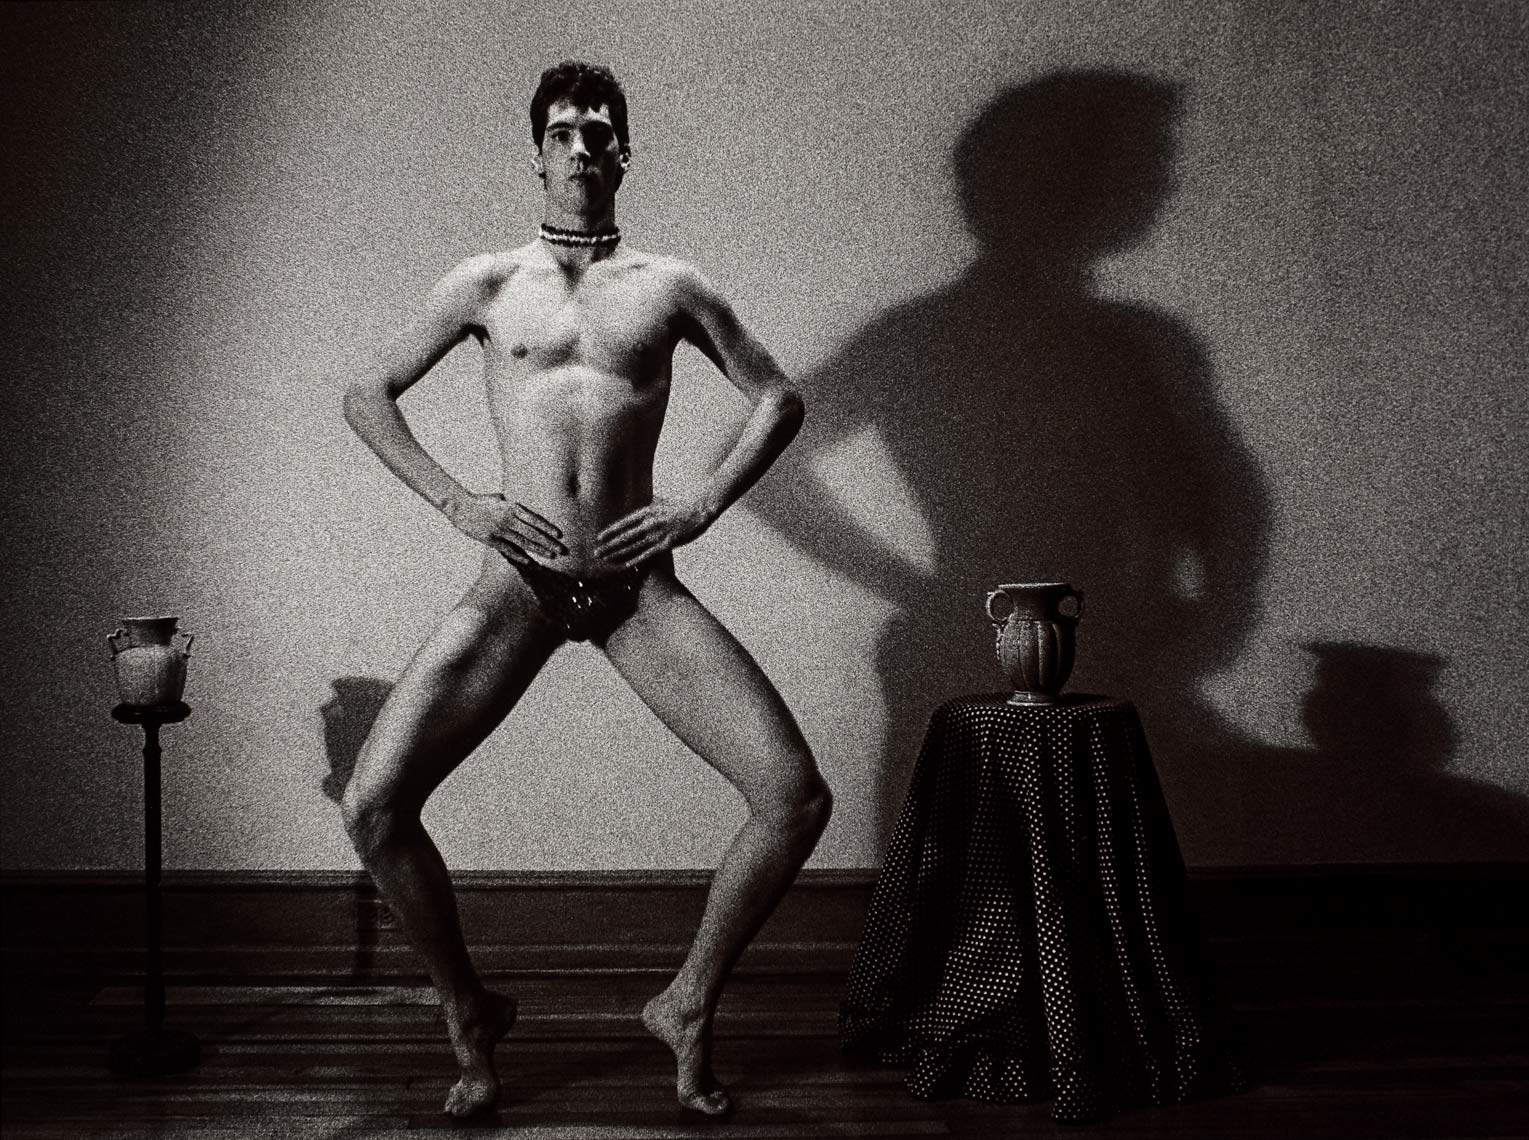 David Lebe; Vases, 1983, male nude, black and white photograph